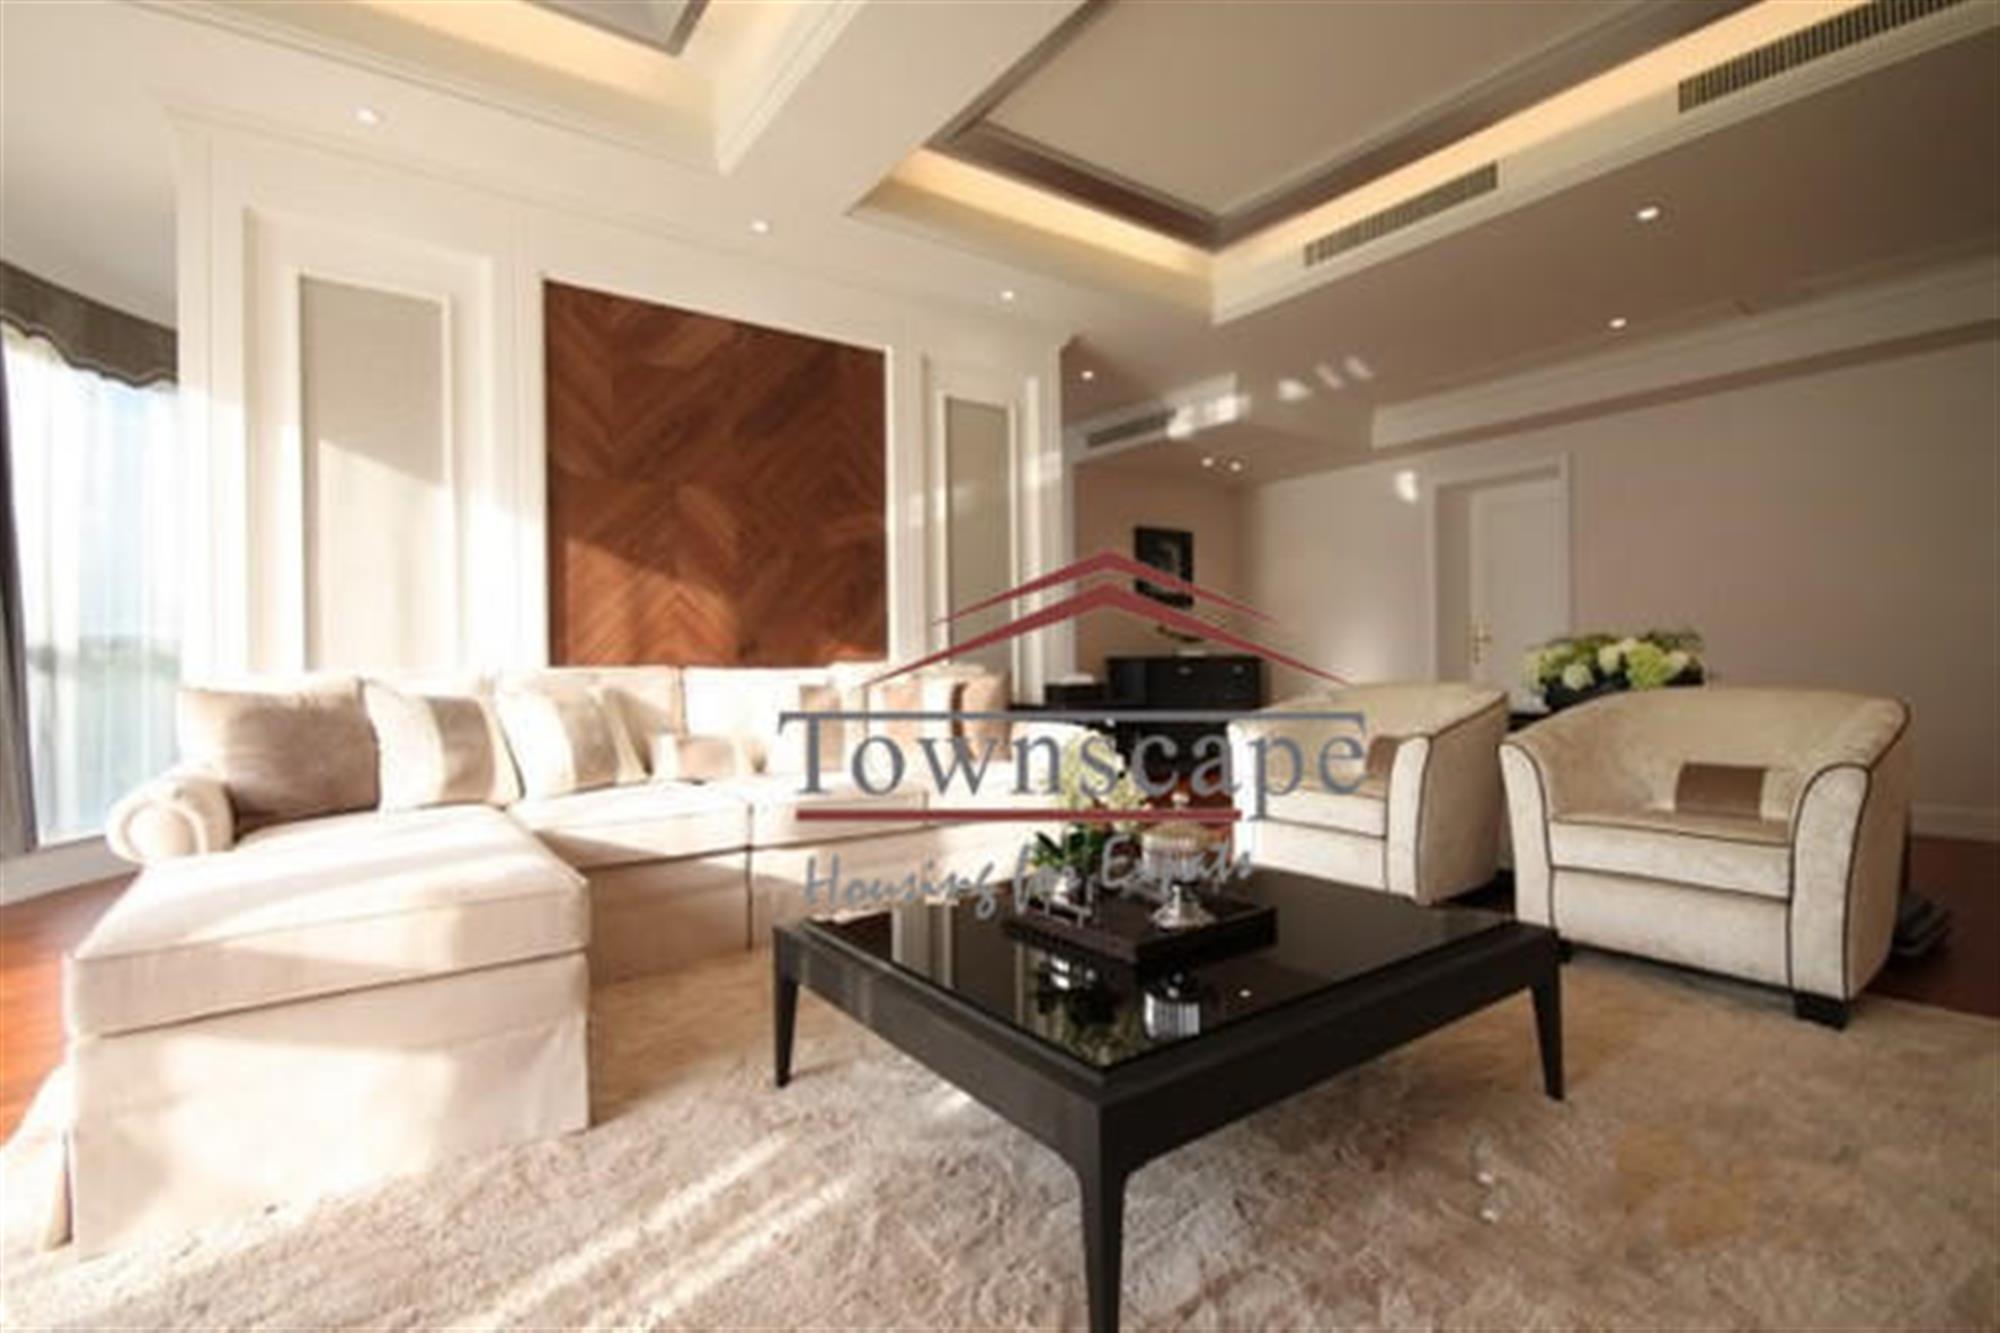 Gorgeous livingroom New LARGE LUX Hongqiao Apartment in Shanghai for Rent